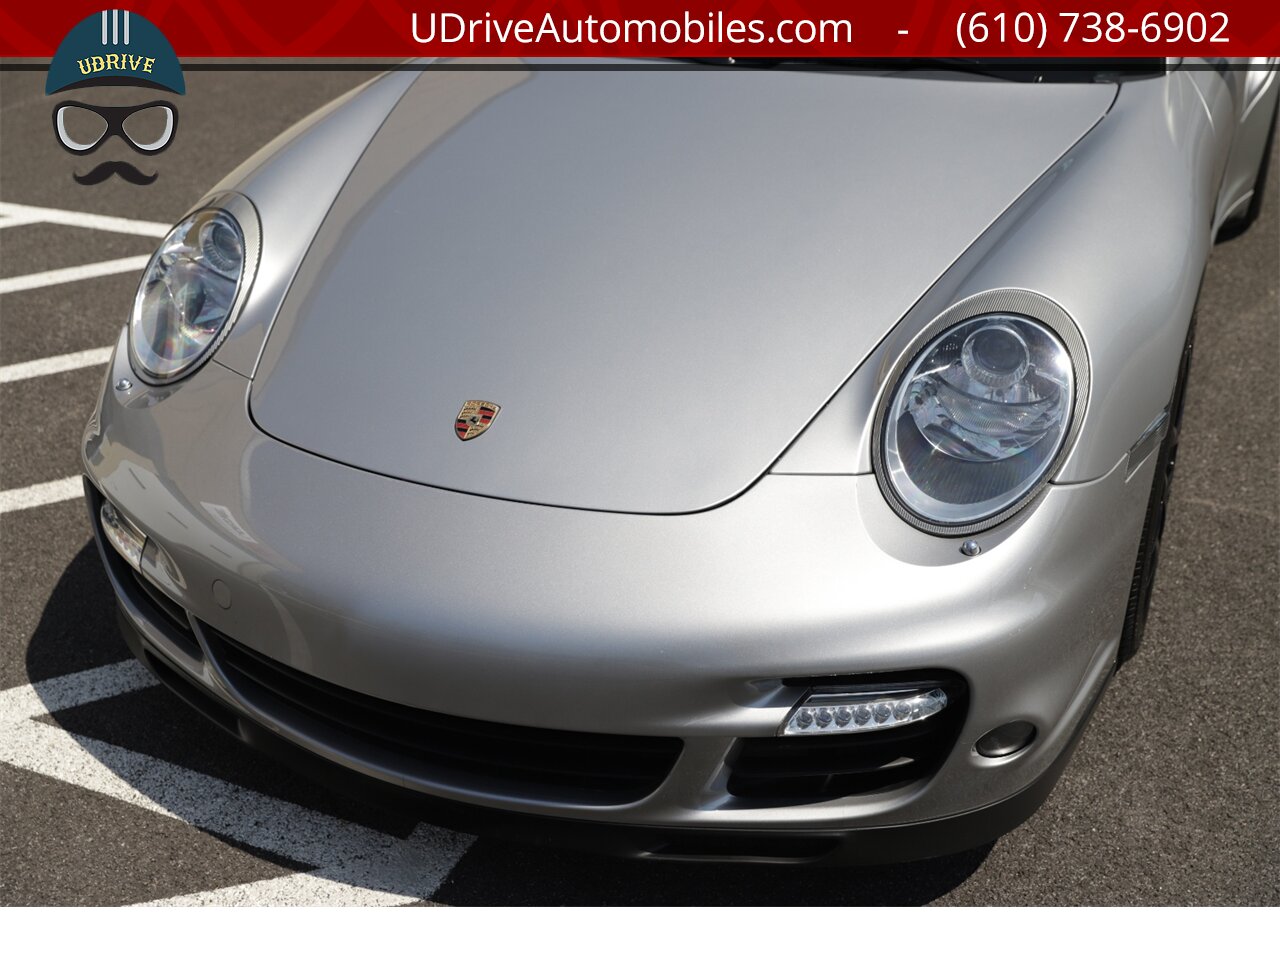 2008 Porsche 911 6 Speed Manual Turbo 997 PCCB's $149k MSRP   - Photo 10 - West Chester, PA 19382